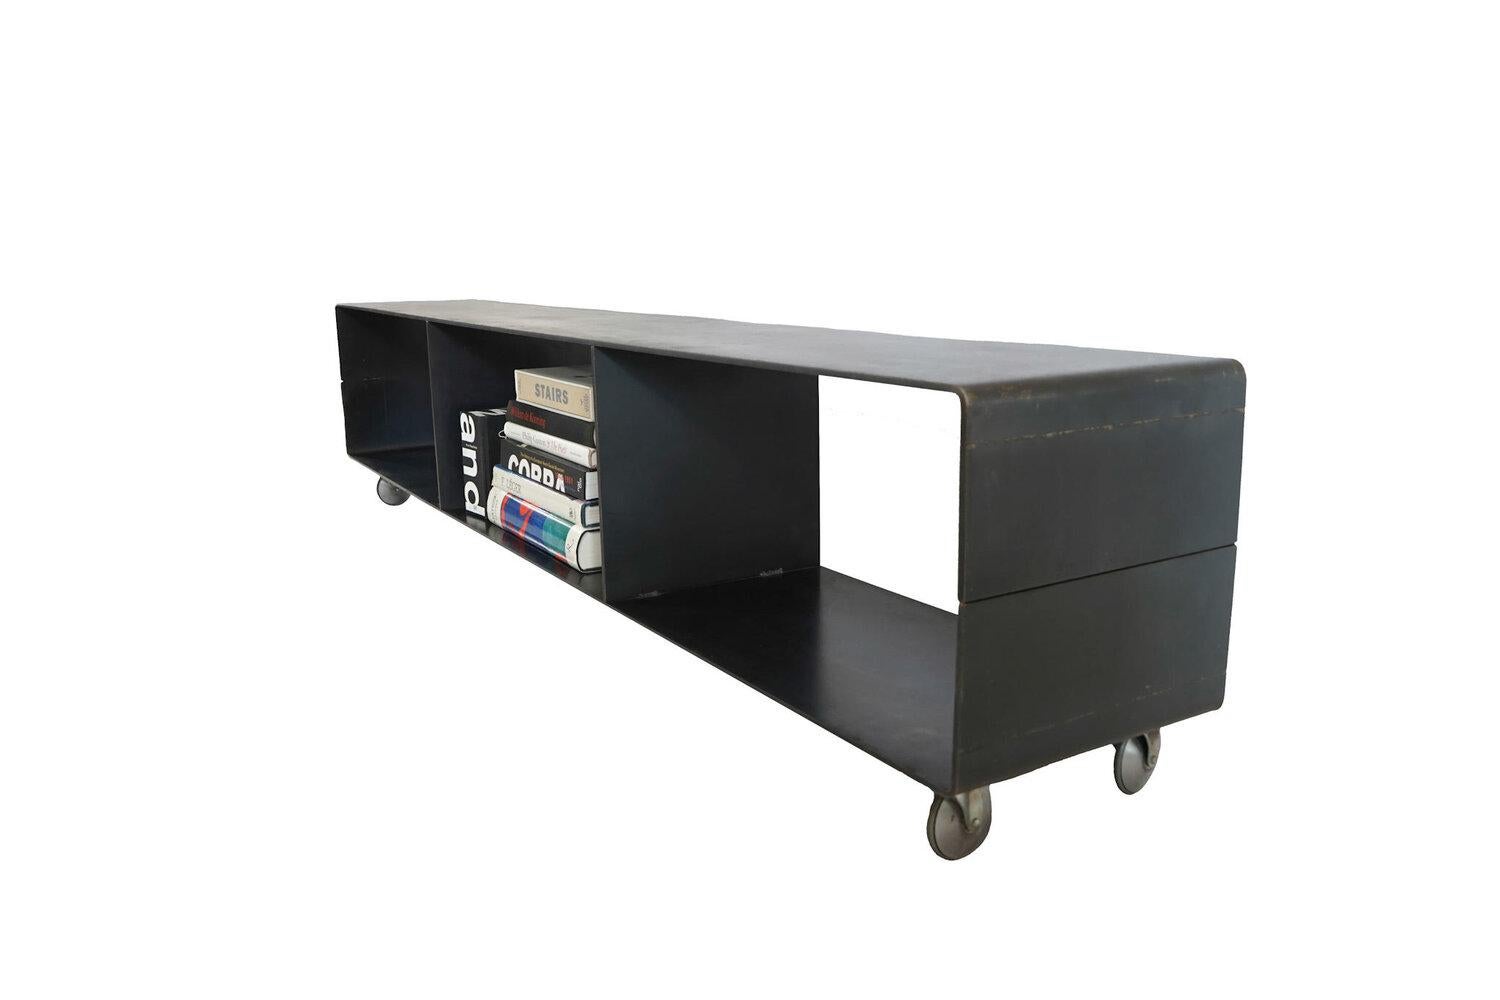 - Designed and handmade by Female Founded Design Firm 
- Blackened, hot rolled steel bookcase on castor wheels
- Handmade in the USA, made with USA Steel
- Made to order
- Measures: L 71” x W 18.25” x H 10”
- Hot Rolled J Series

The Hot